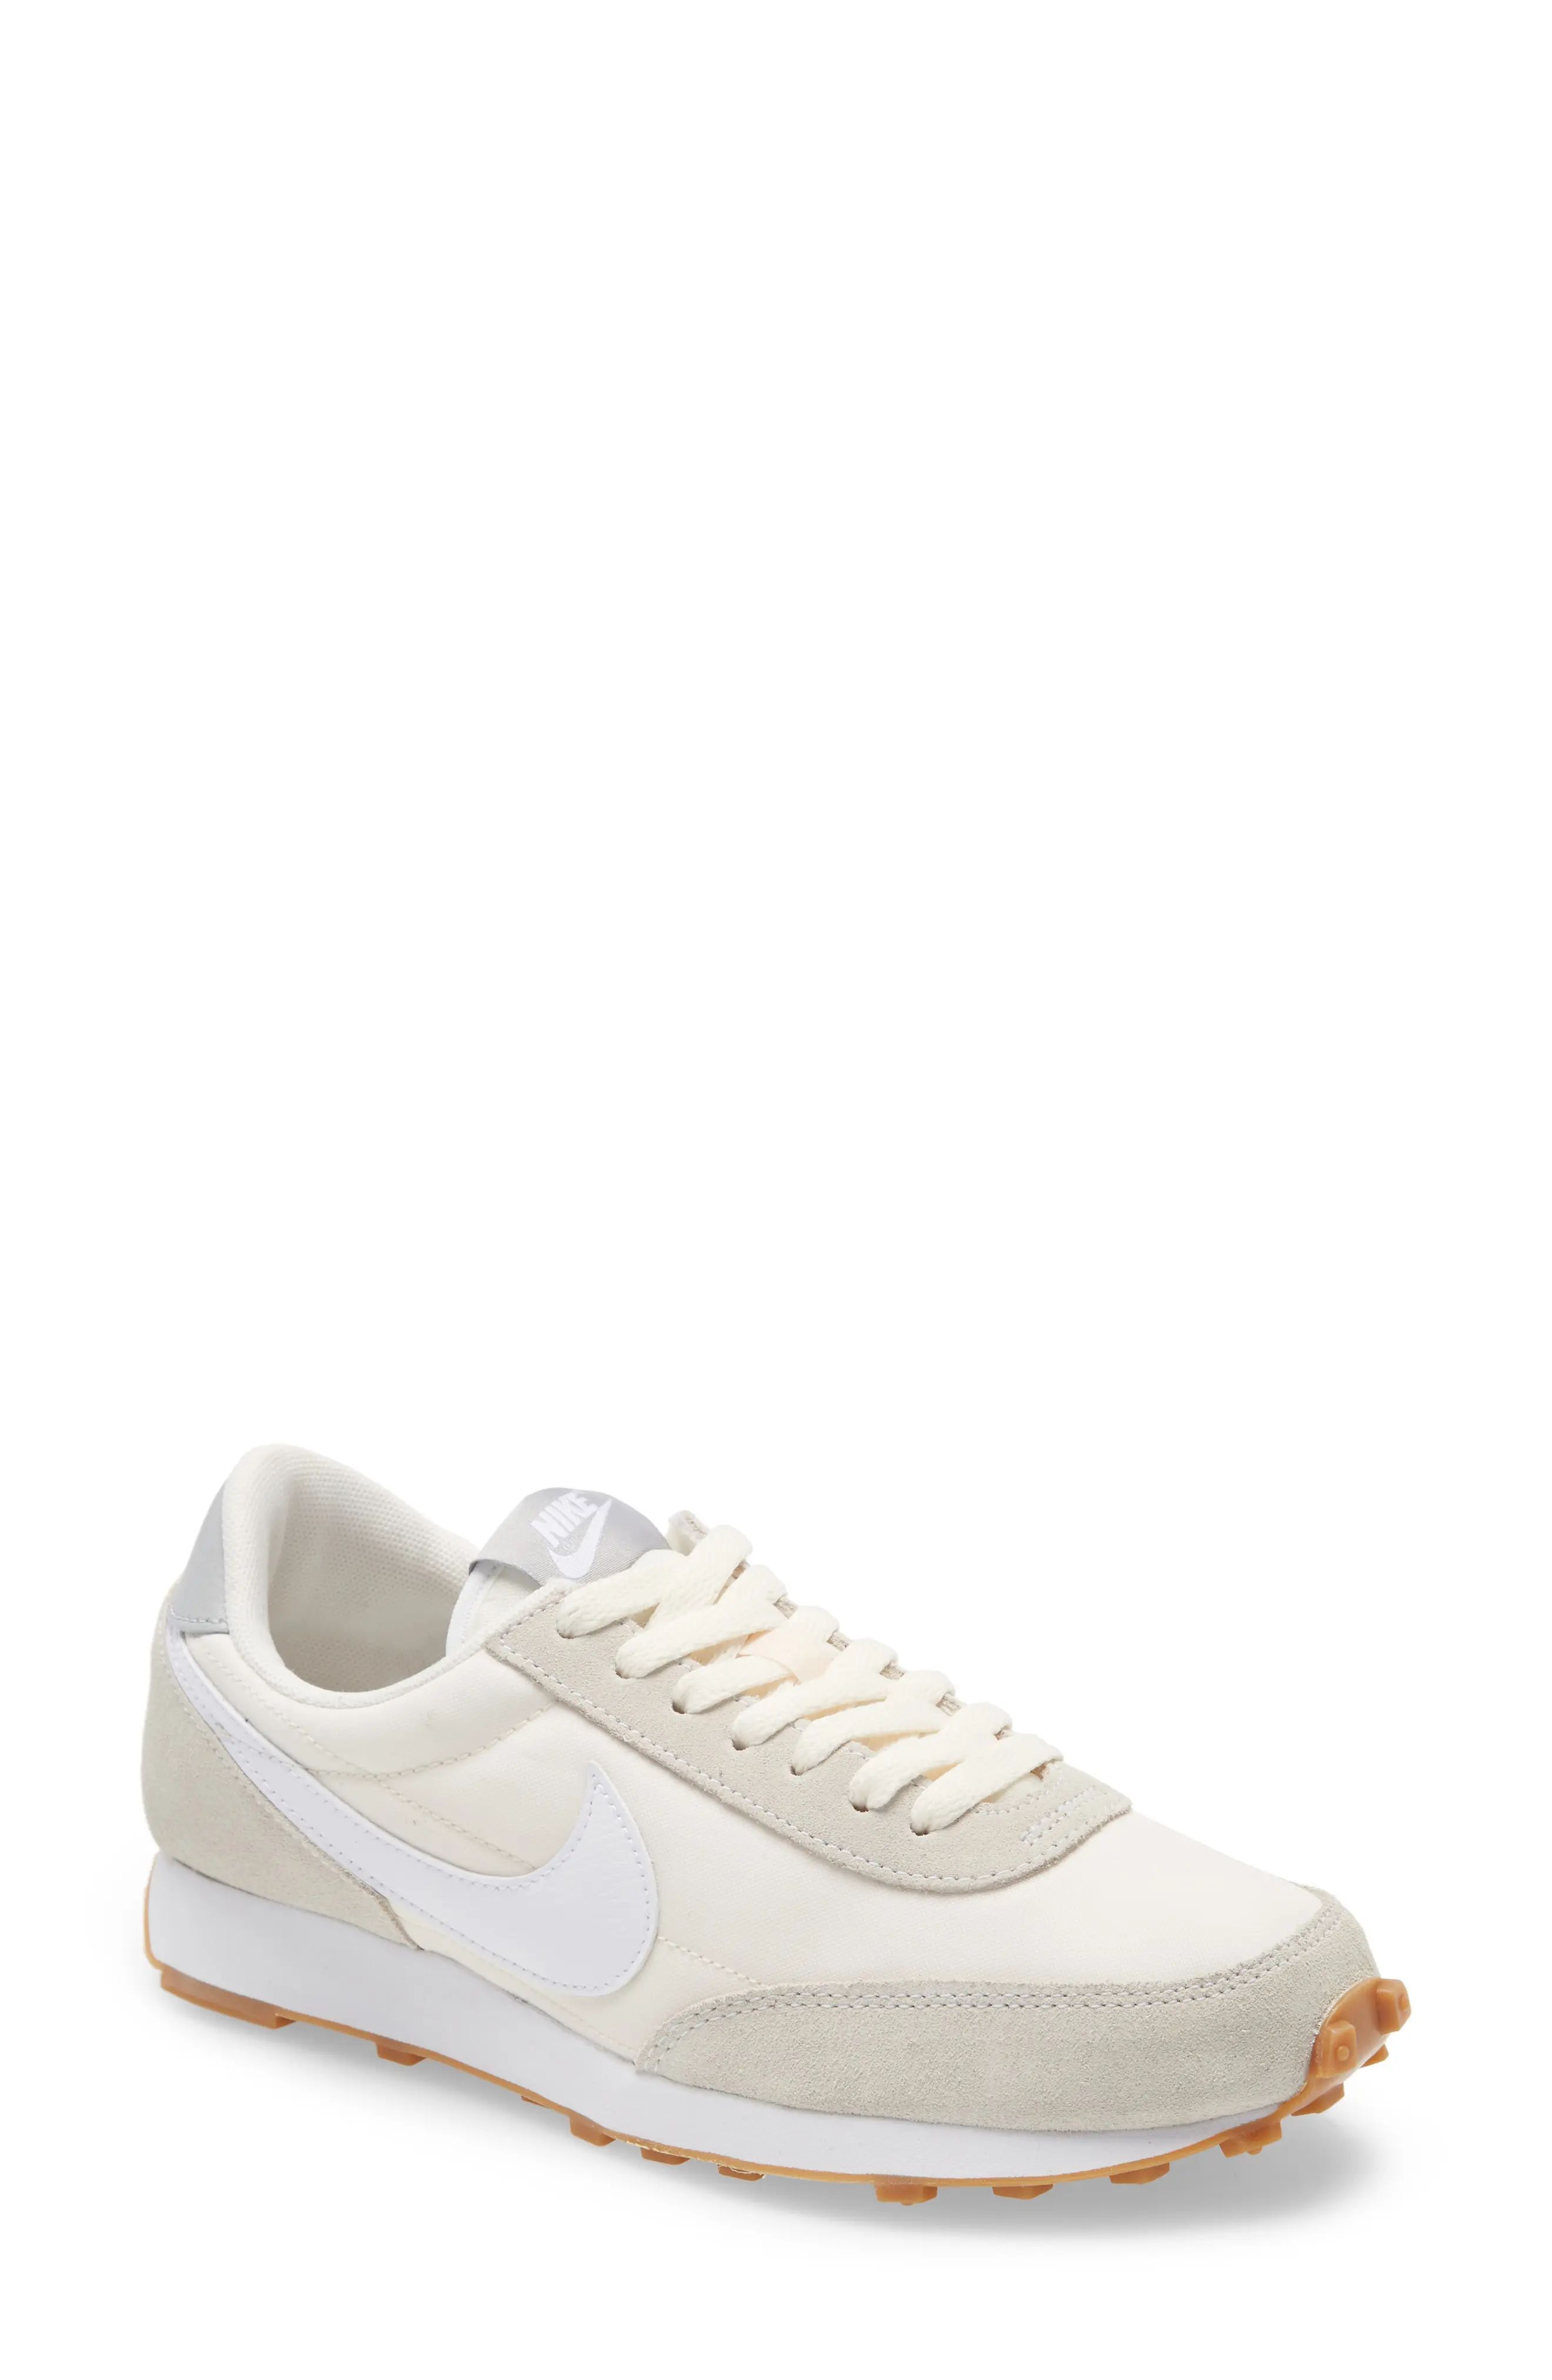 Nike Daybreak Sneaker, Size 8 in Summit White/Pale Ivory at Nordstrom | Nordstrom